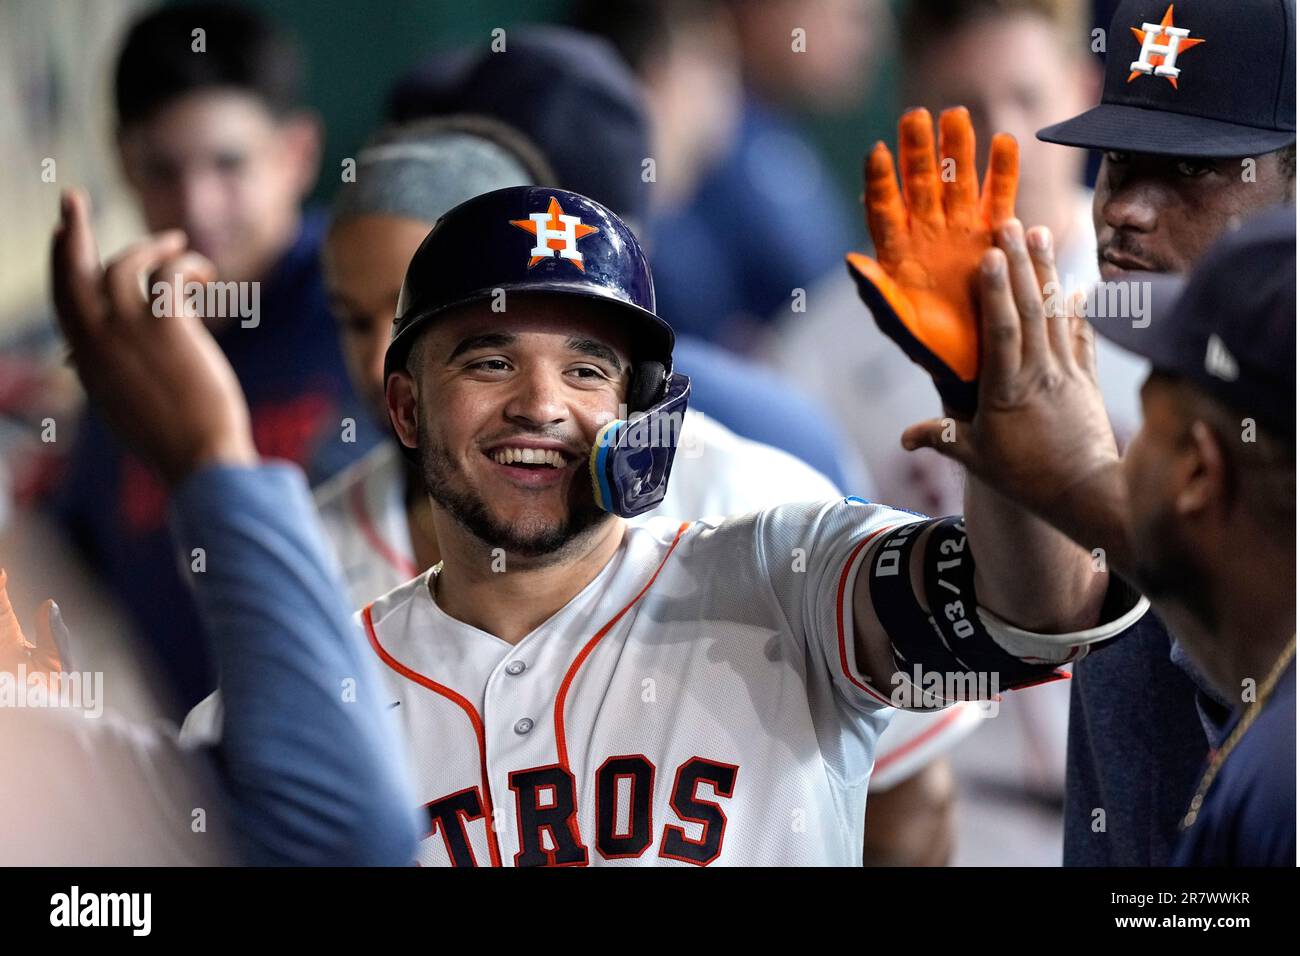 Houston Astros' Yainer Diaz celebrates in the dugout after hitting